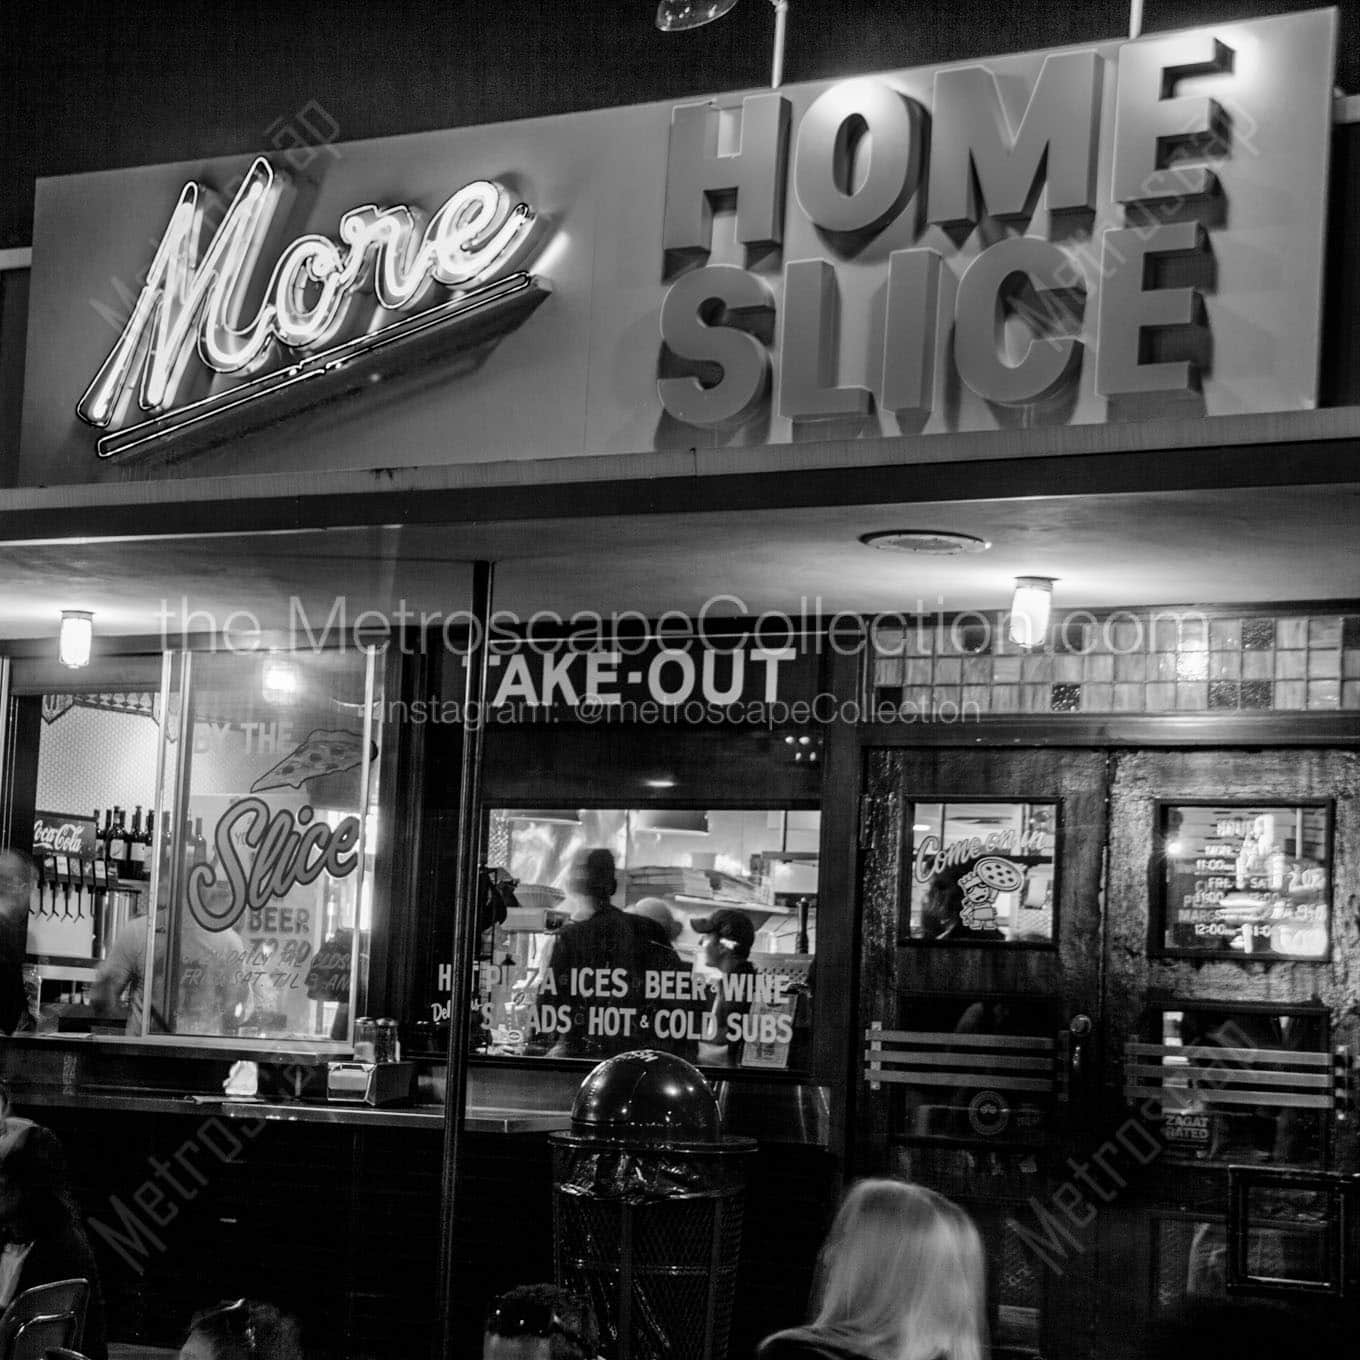 home slice take out window Black & White Office Art